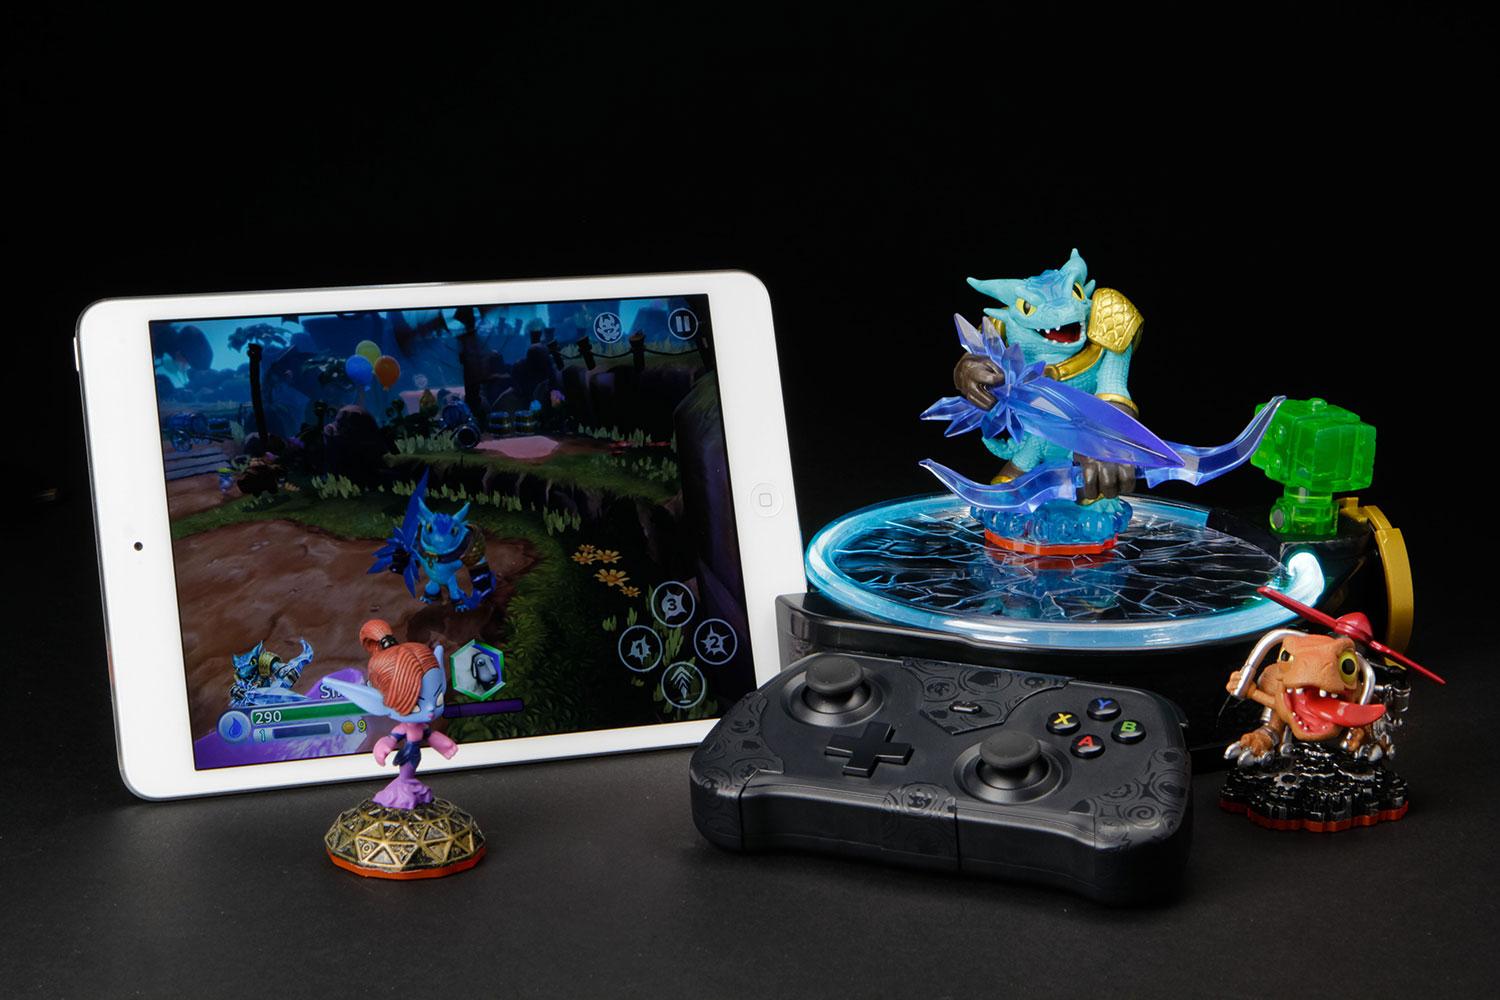 Skylanders Trap Team review: Among the shards – SideQuesting